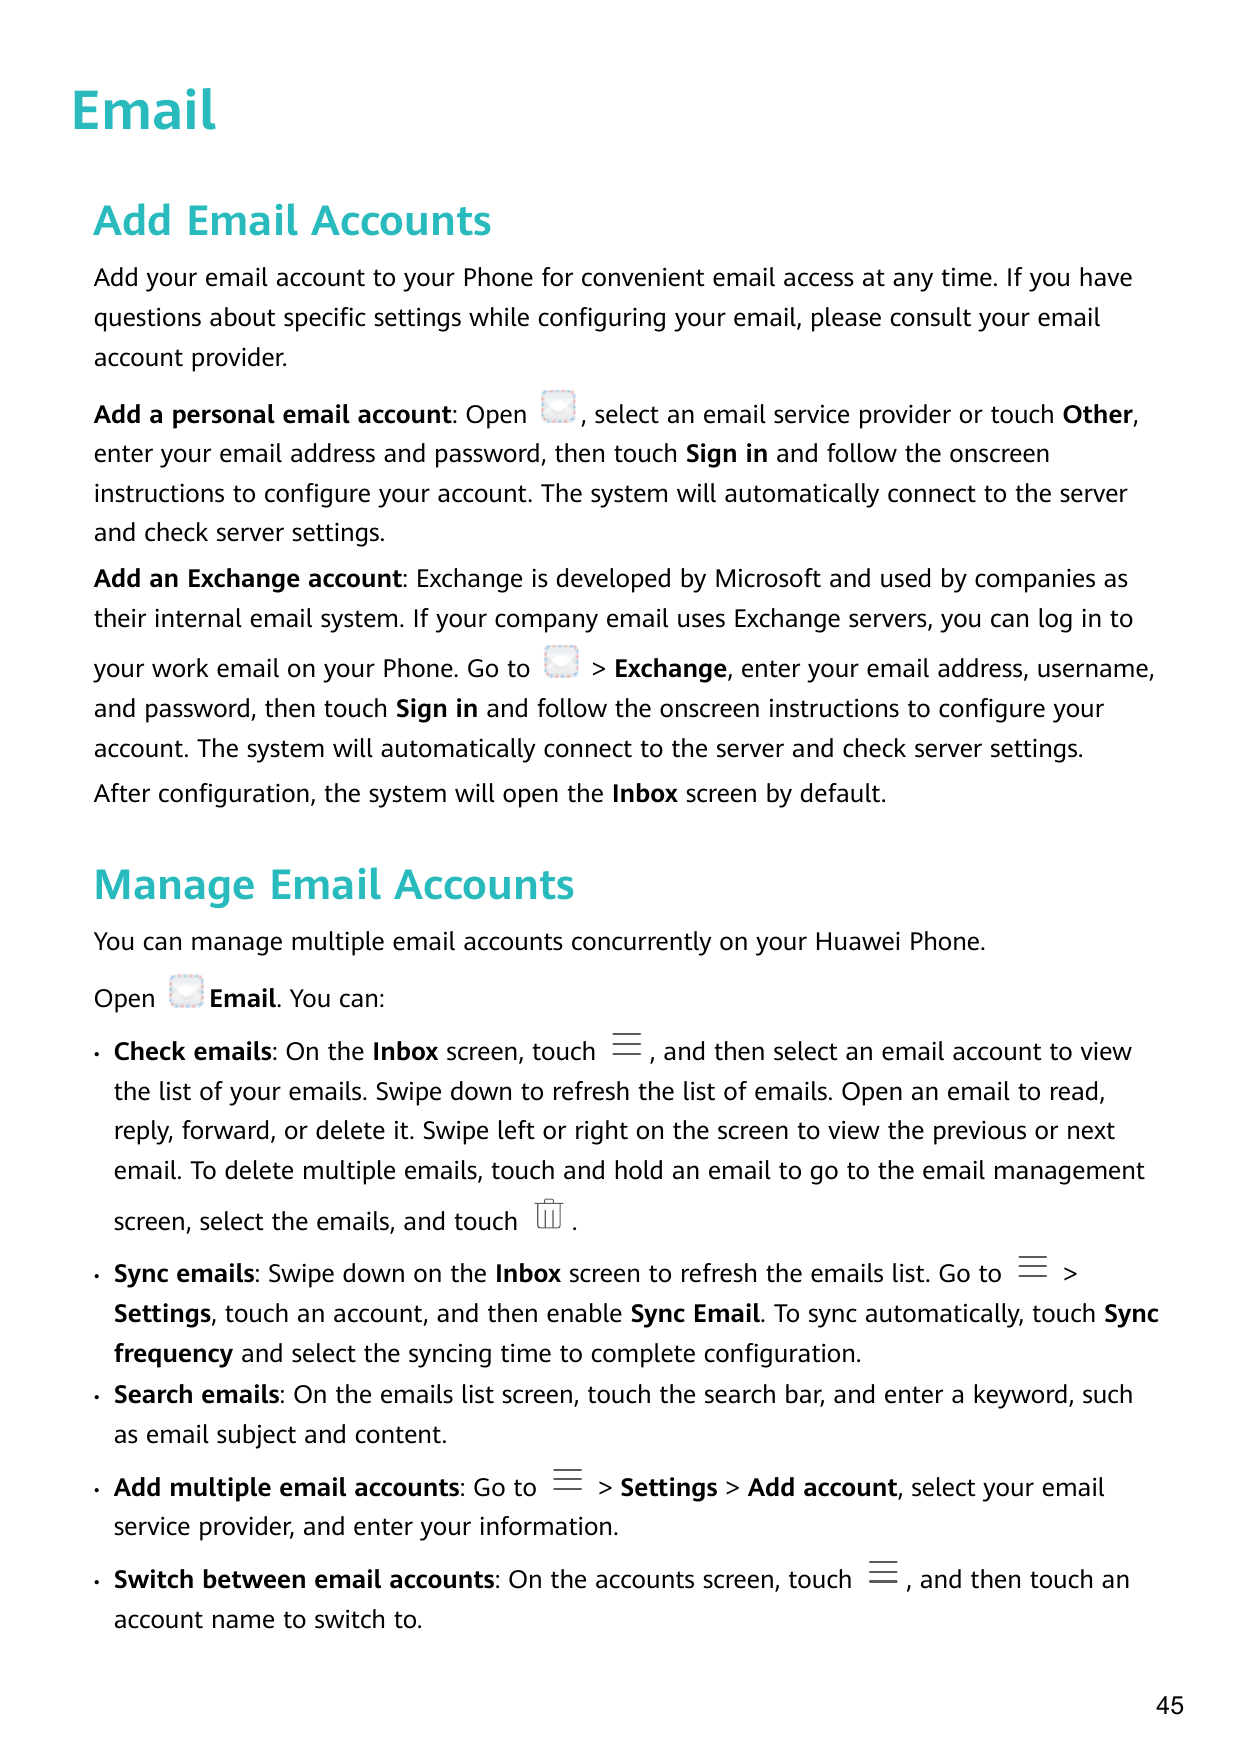 EmailAdd Email AccountsAdd your email account to your Phone for convenient email access at any time. If you havequestions about 